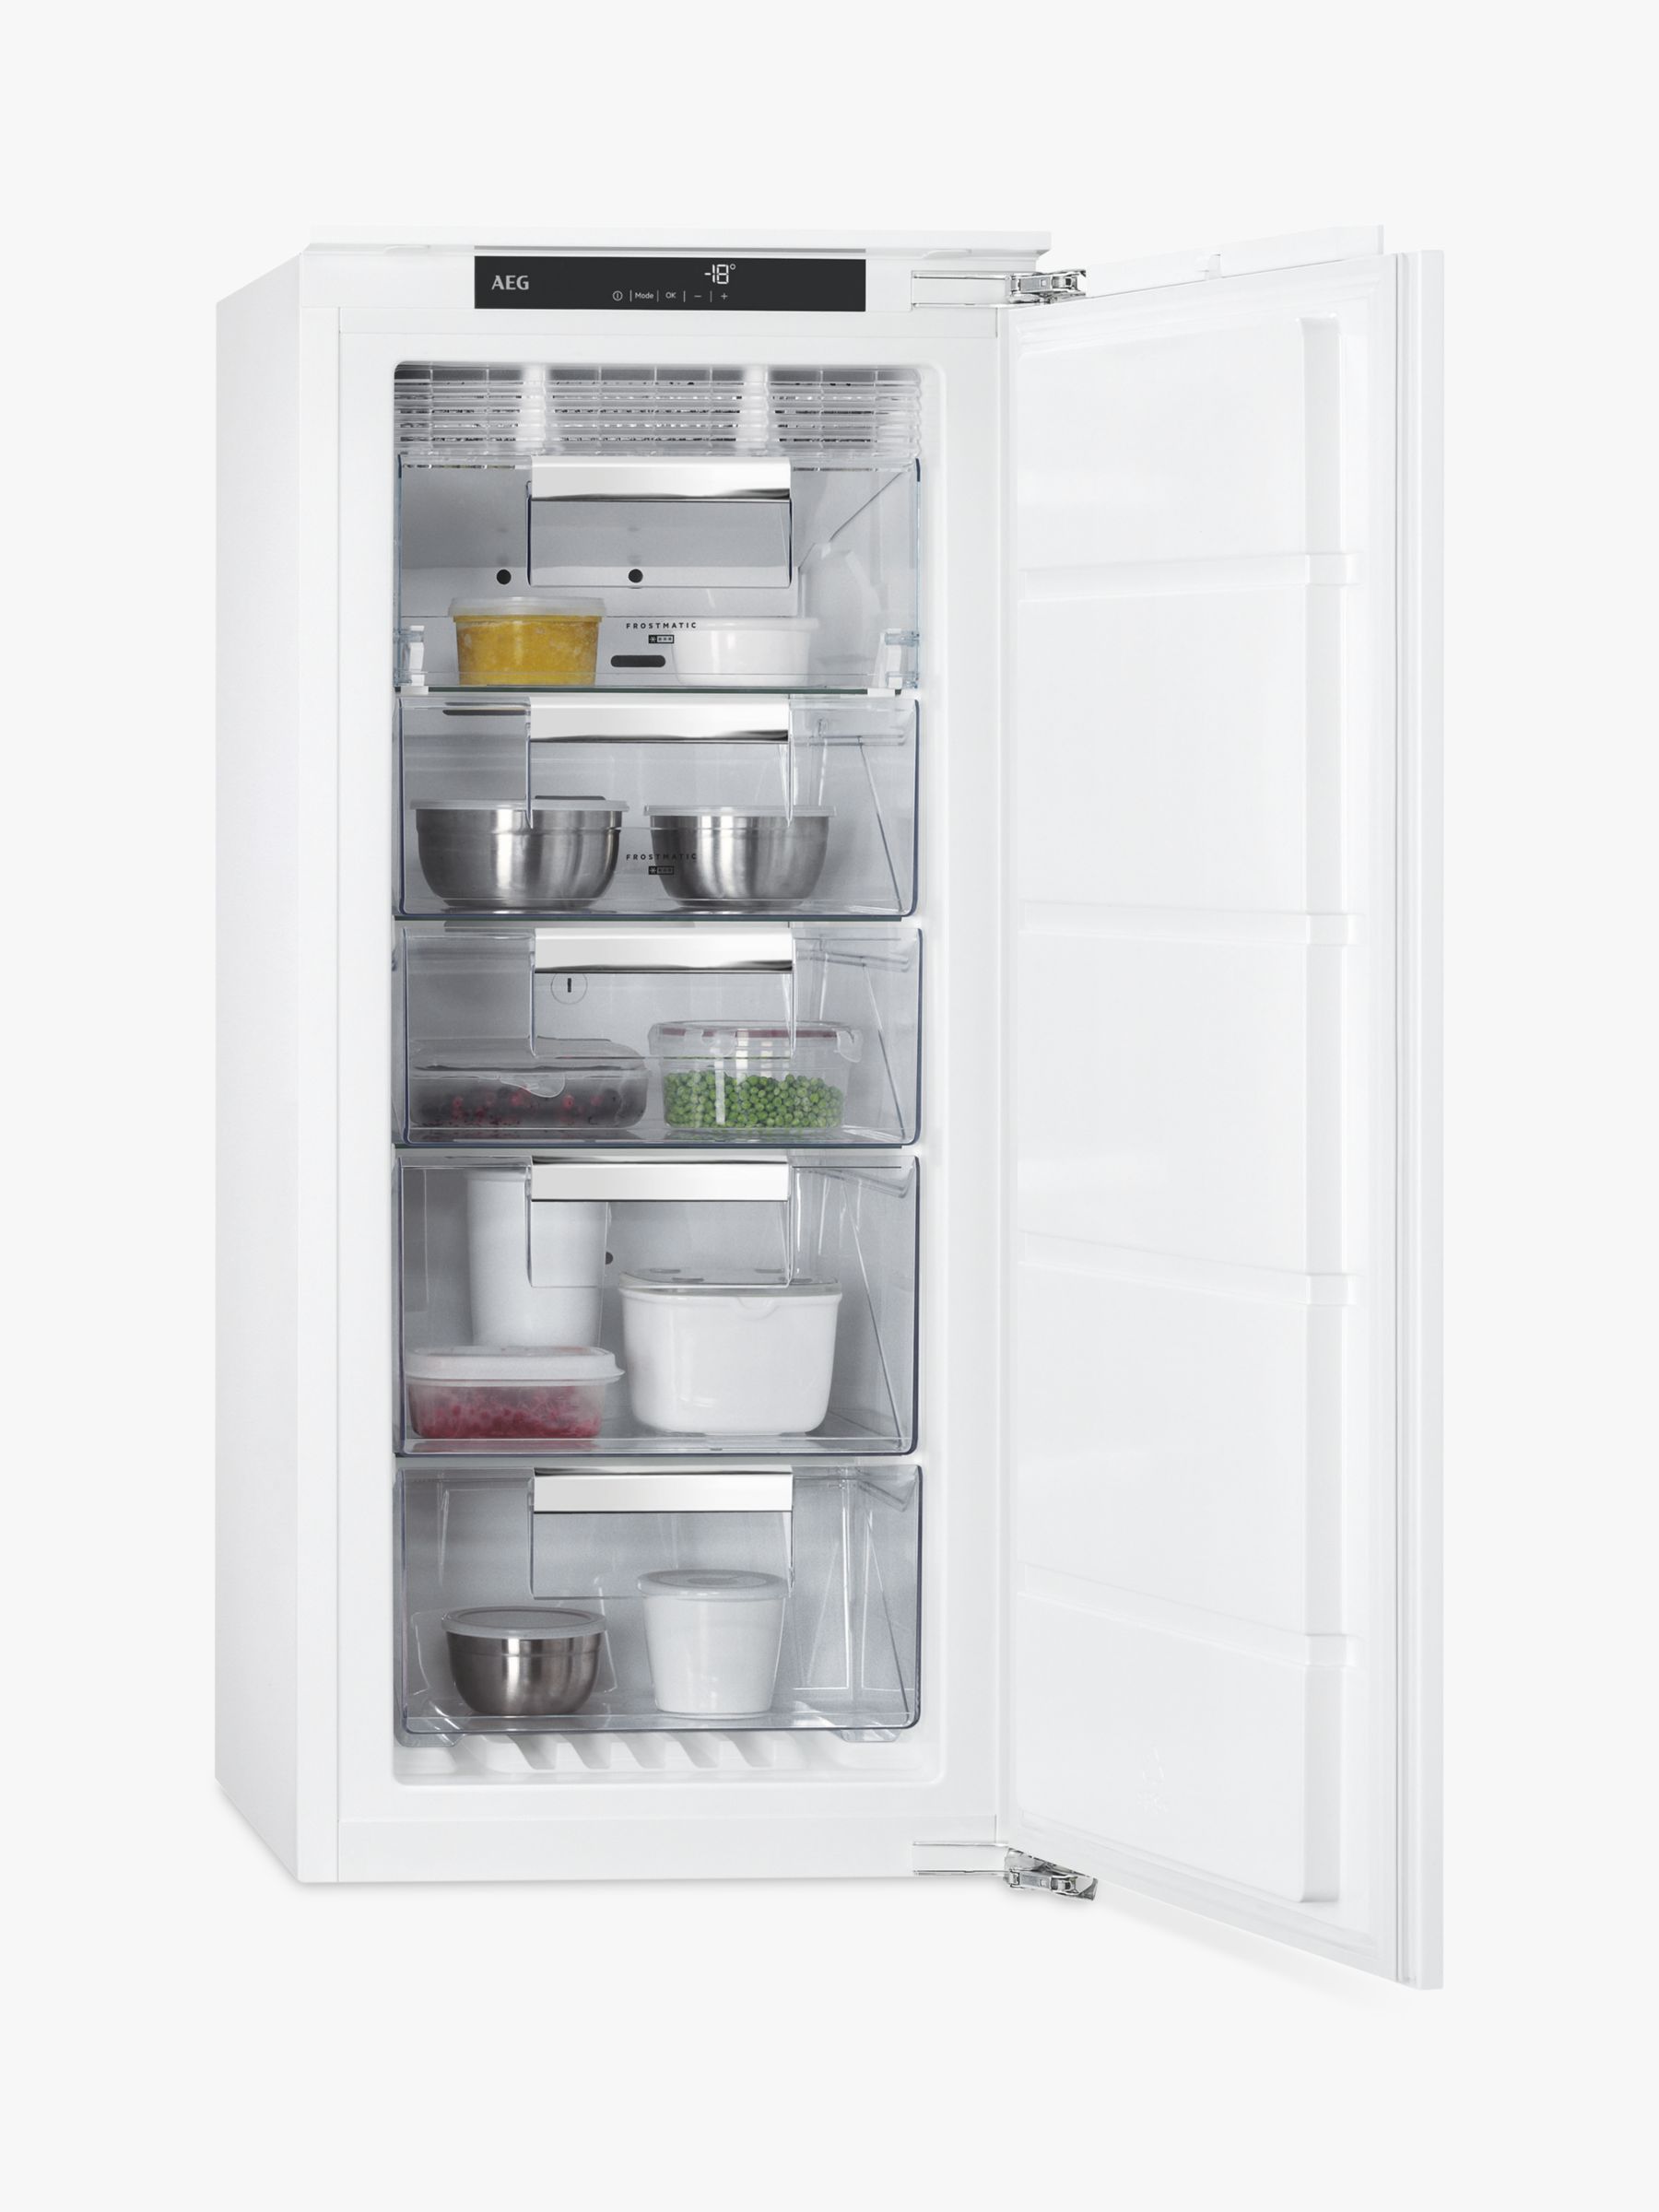 AEG ABB8121VNF Integrated Freezer, A+ Energy Rating, 56cm Wide, White